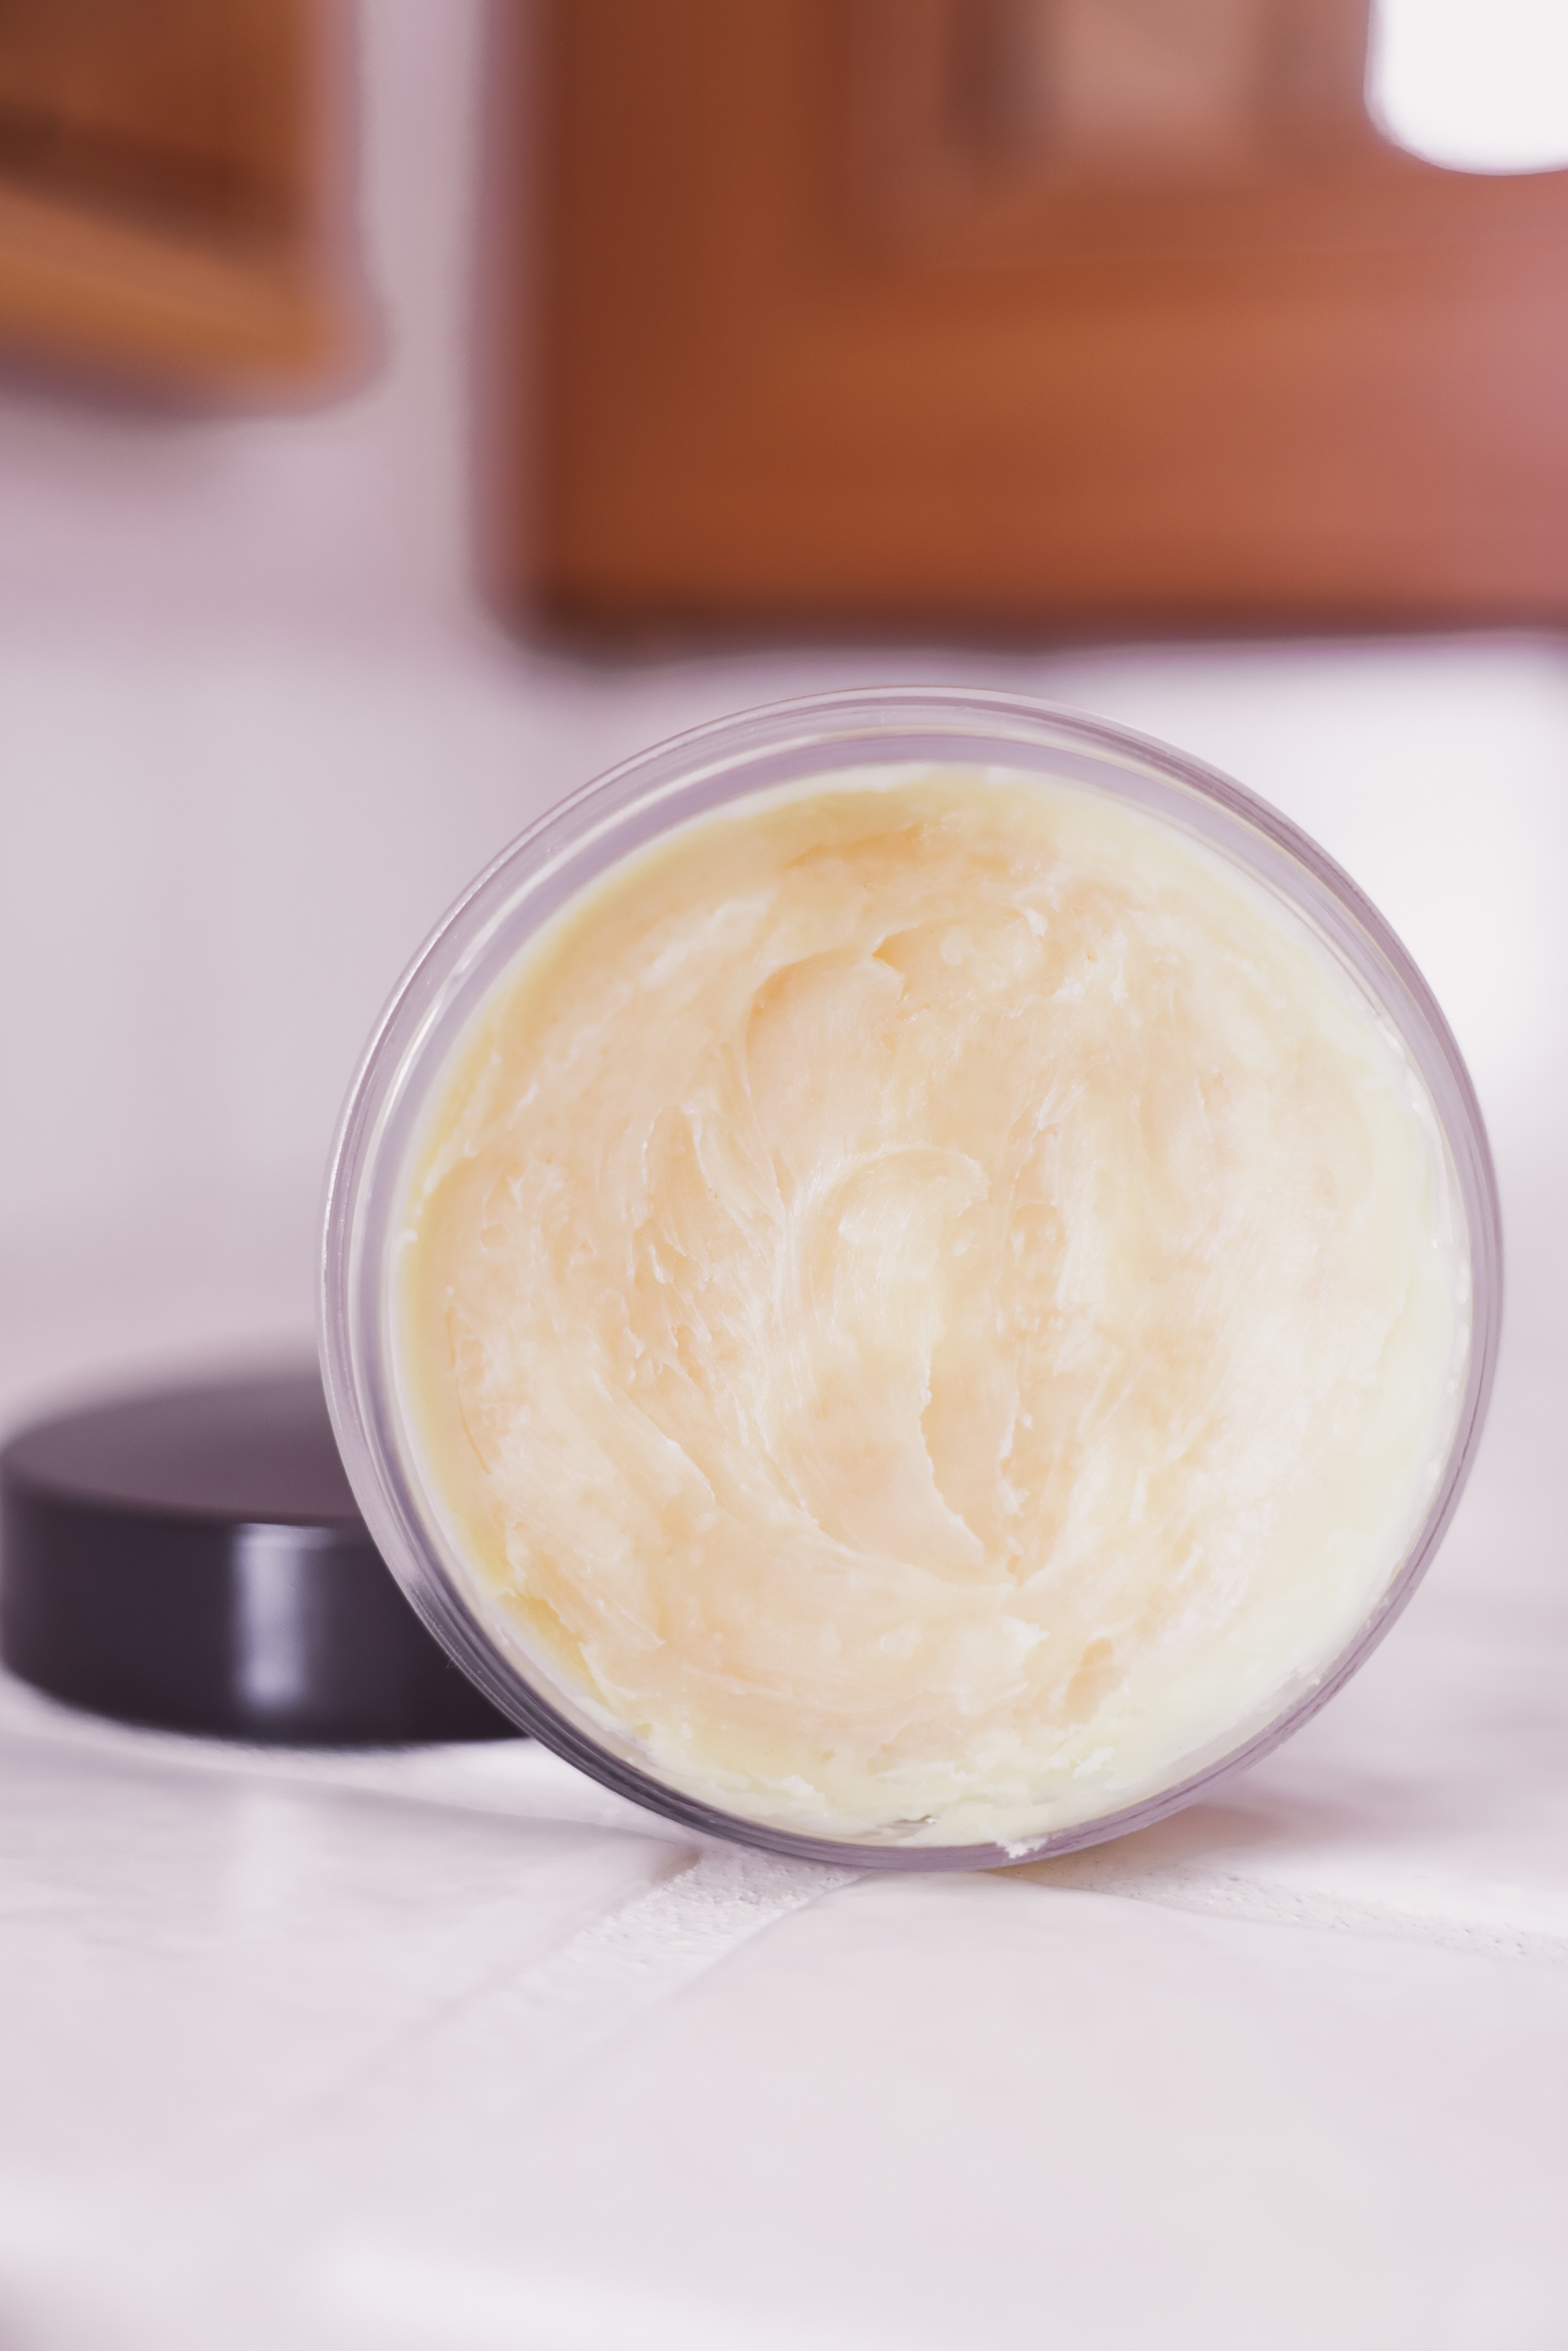 top skincare favorites of the year for women over 40 featuring Colleen Rothschild's Radiant Cleansing Balm